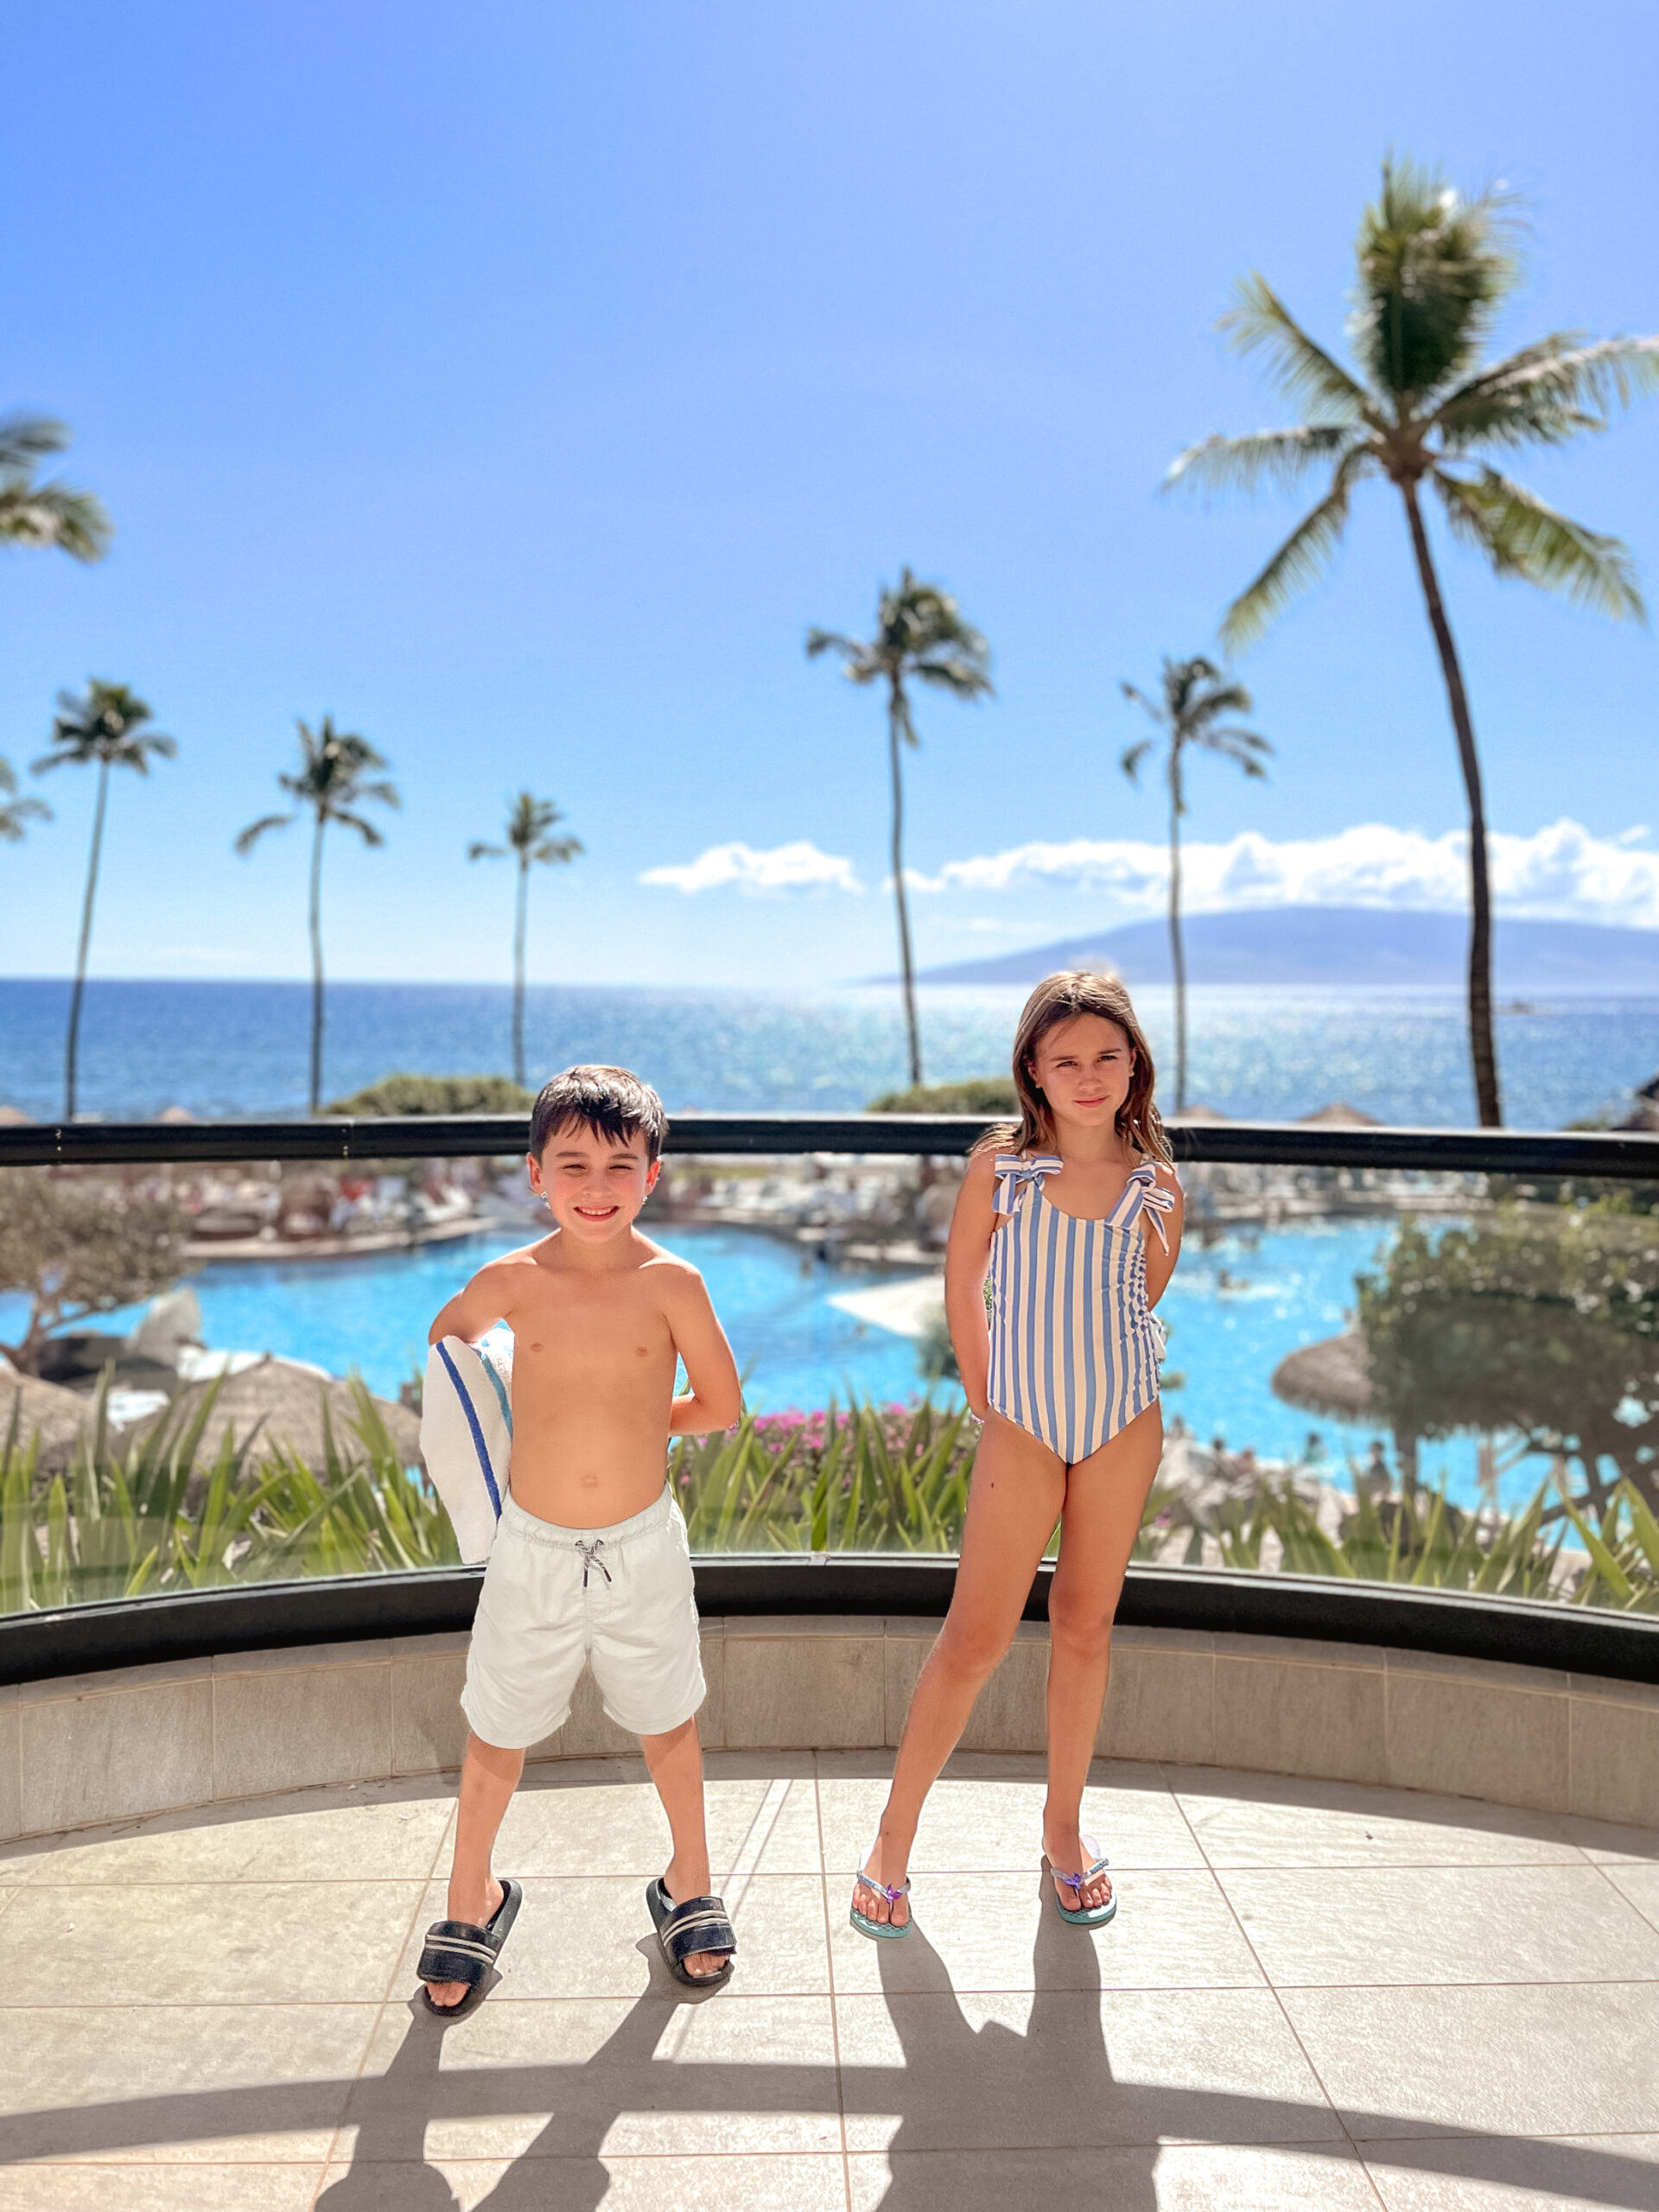 where we stayed in Maui, Hawaii for part 2 of our vacation #theldltravels #hawaii #maui #hyattregency